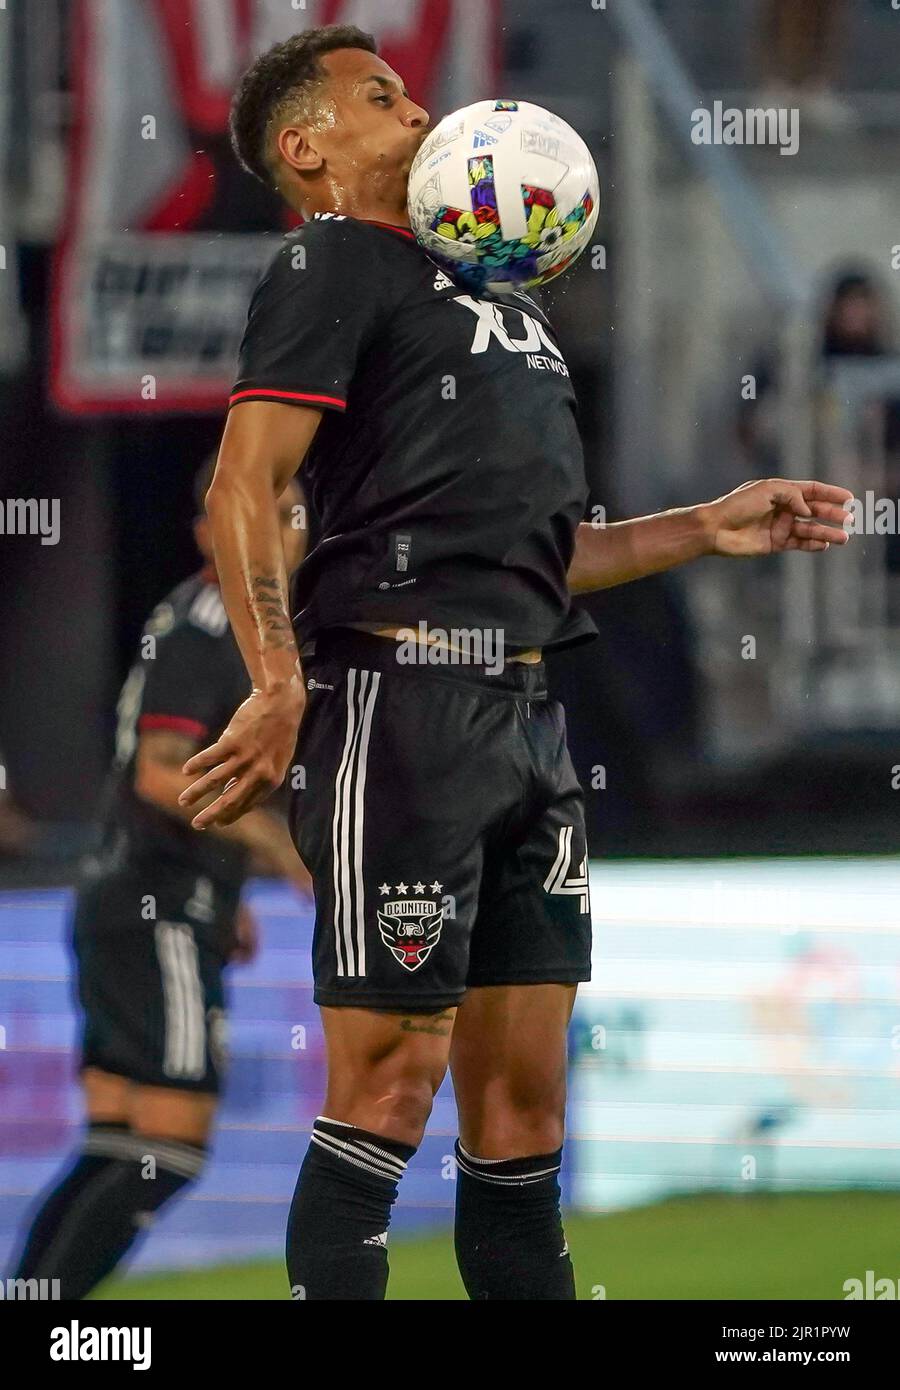 WASHINGTON, DC, USA - 20 AUGUST 2022: D.C. United midfielder Ravel Morrison (49) chests down the ball during a MLS match between D.C United and the Philadelphia Union on August 20, 2022, at Audi Field, in Washington, DC. (Photo by Tony Quinn-Alamy Live News) Stock Photo